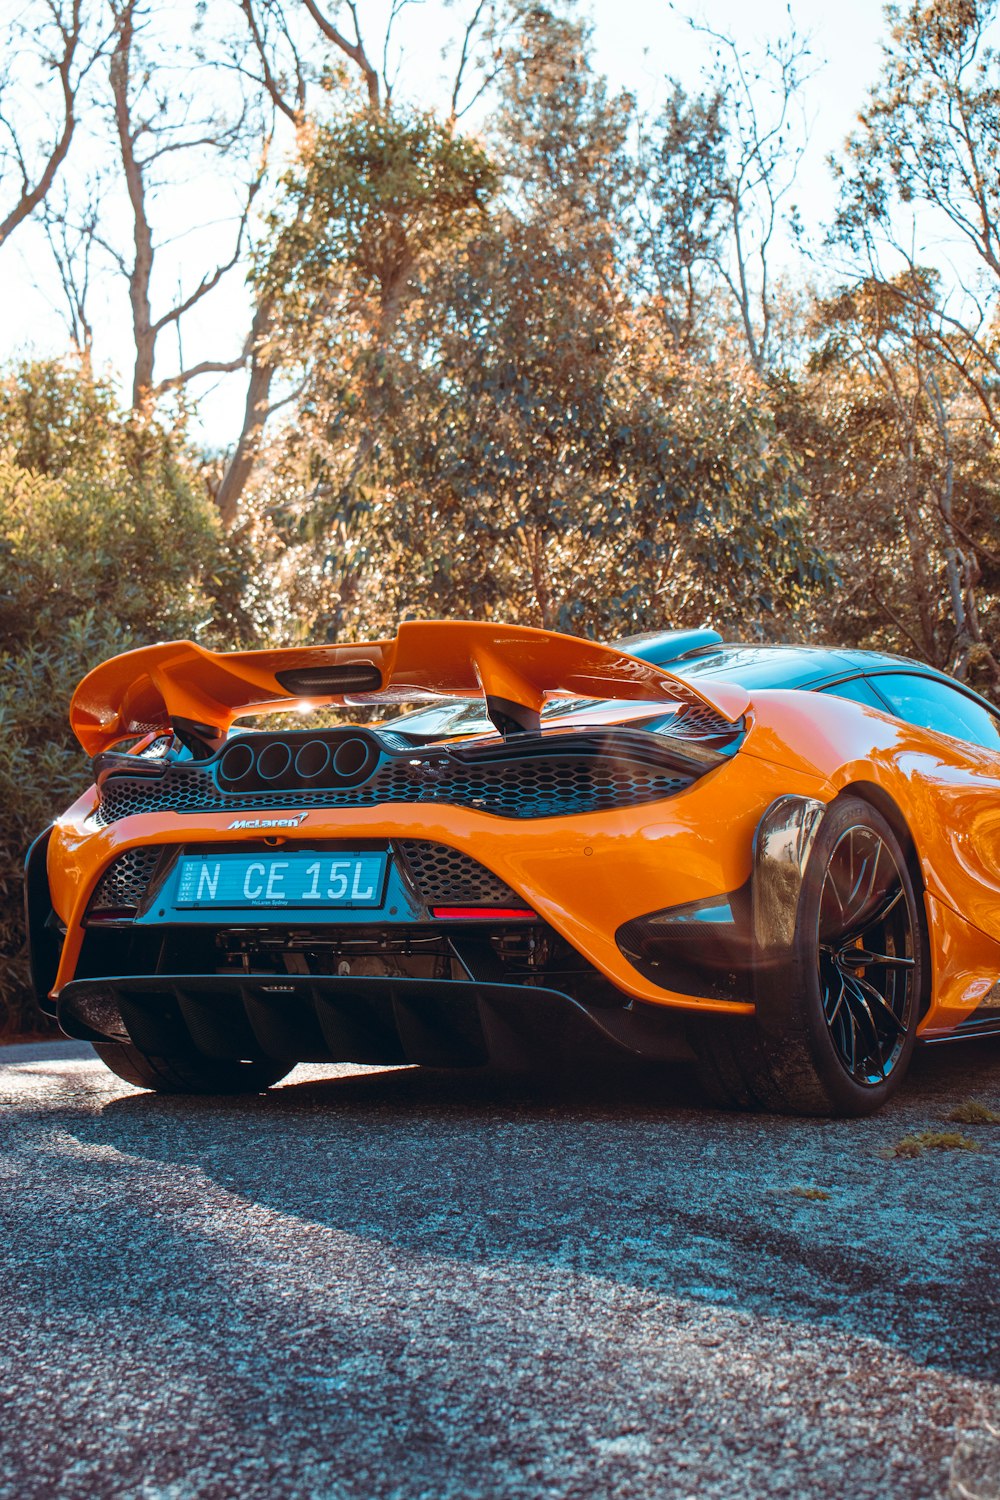 an orange sports car parked on the side of the road